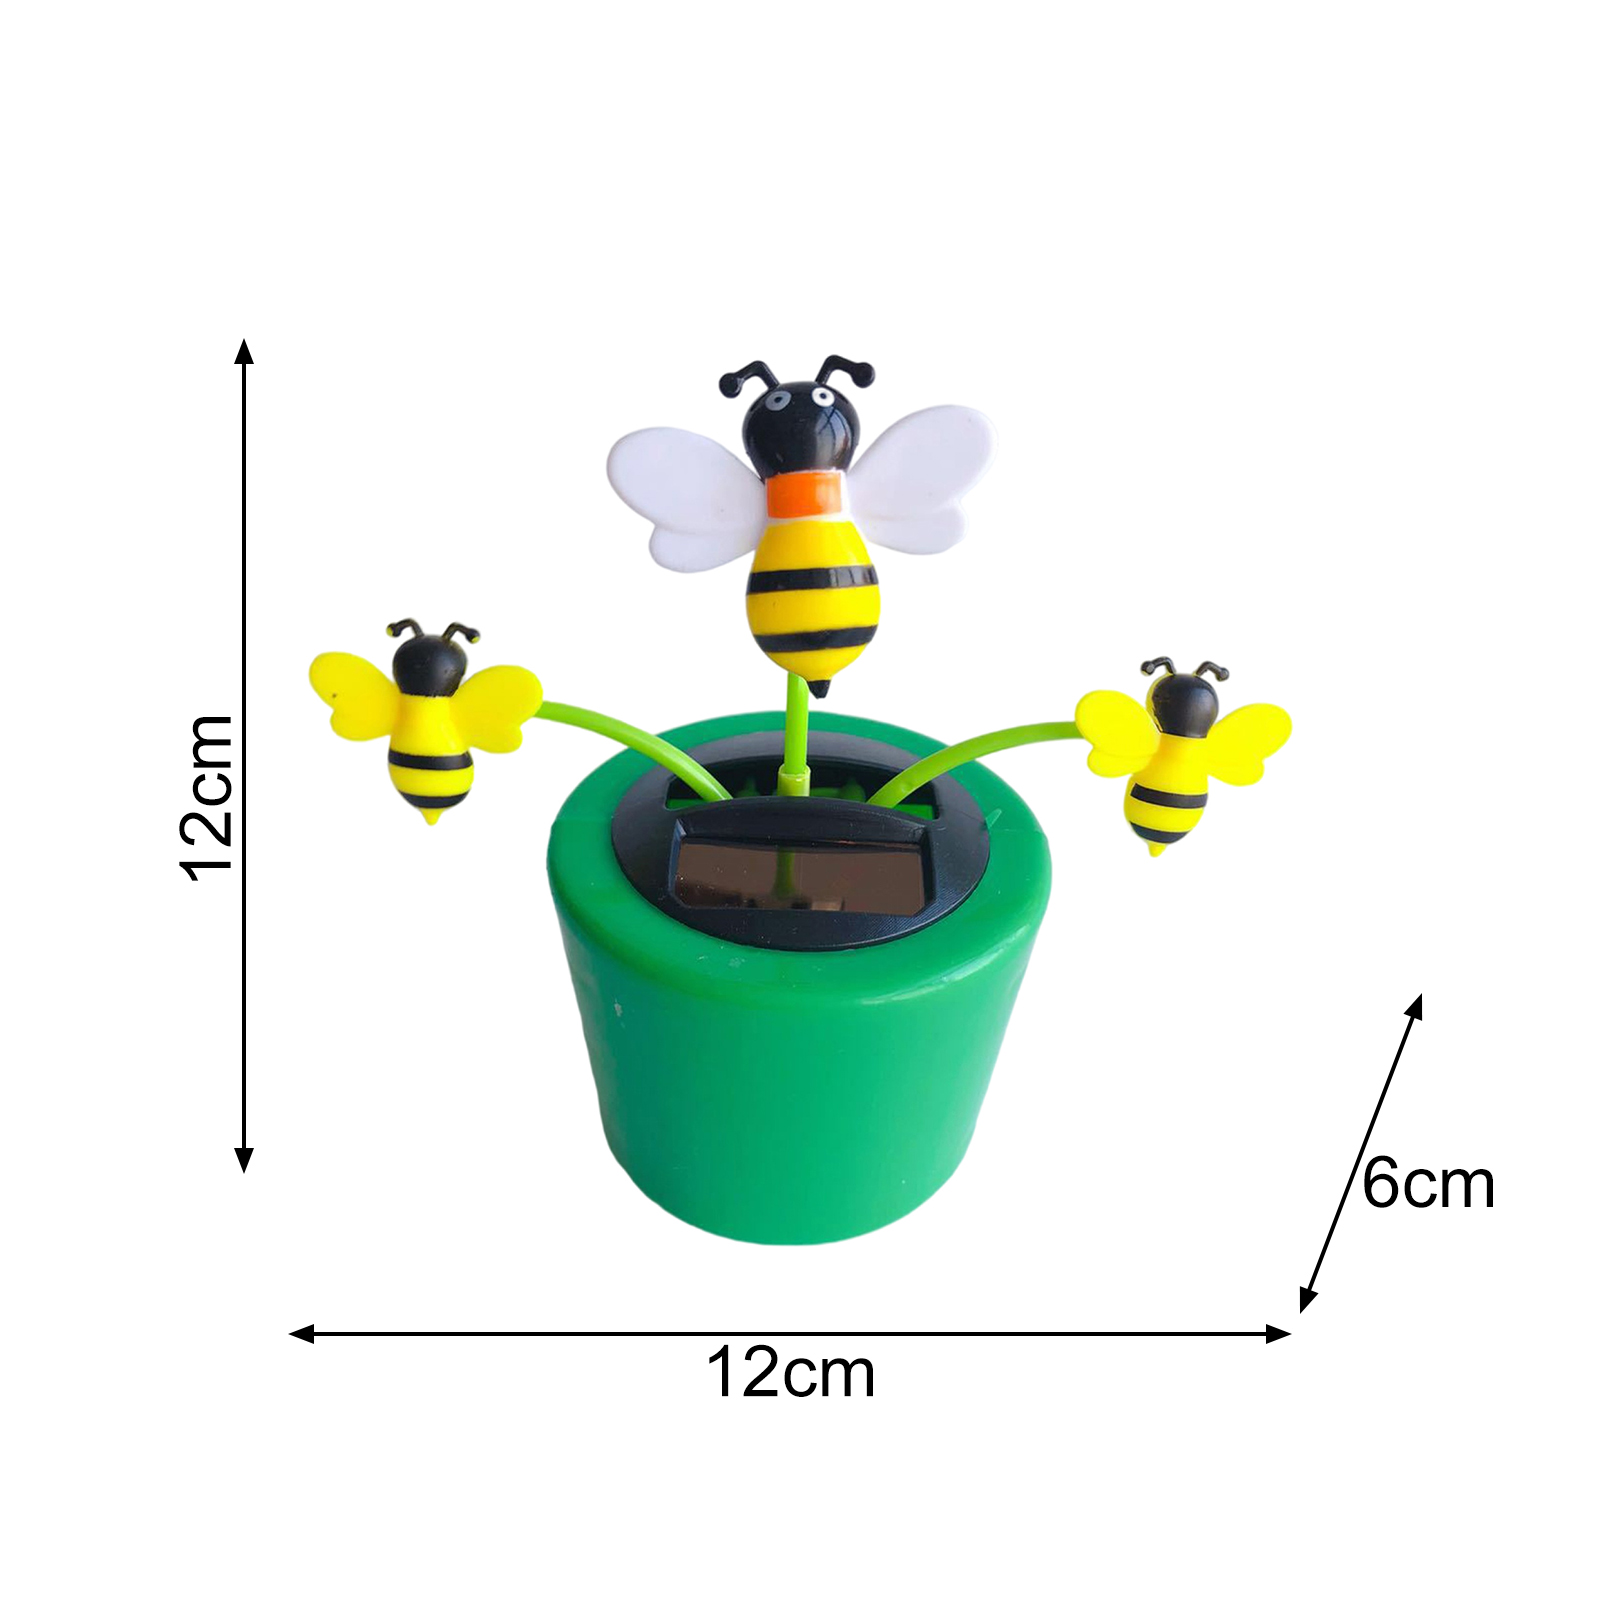 Cute Solar Power Flip Flap Flower Insect for Car Decoration Swing Dancing Flower Eco-Friendly Bobblehead Solar Dancing Flowers in Colorful Pots - image 5 of 8